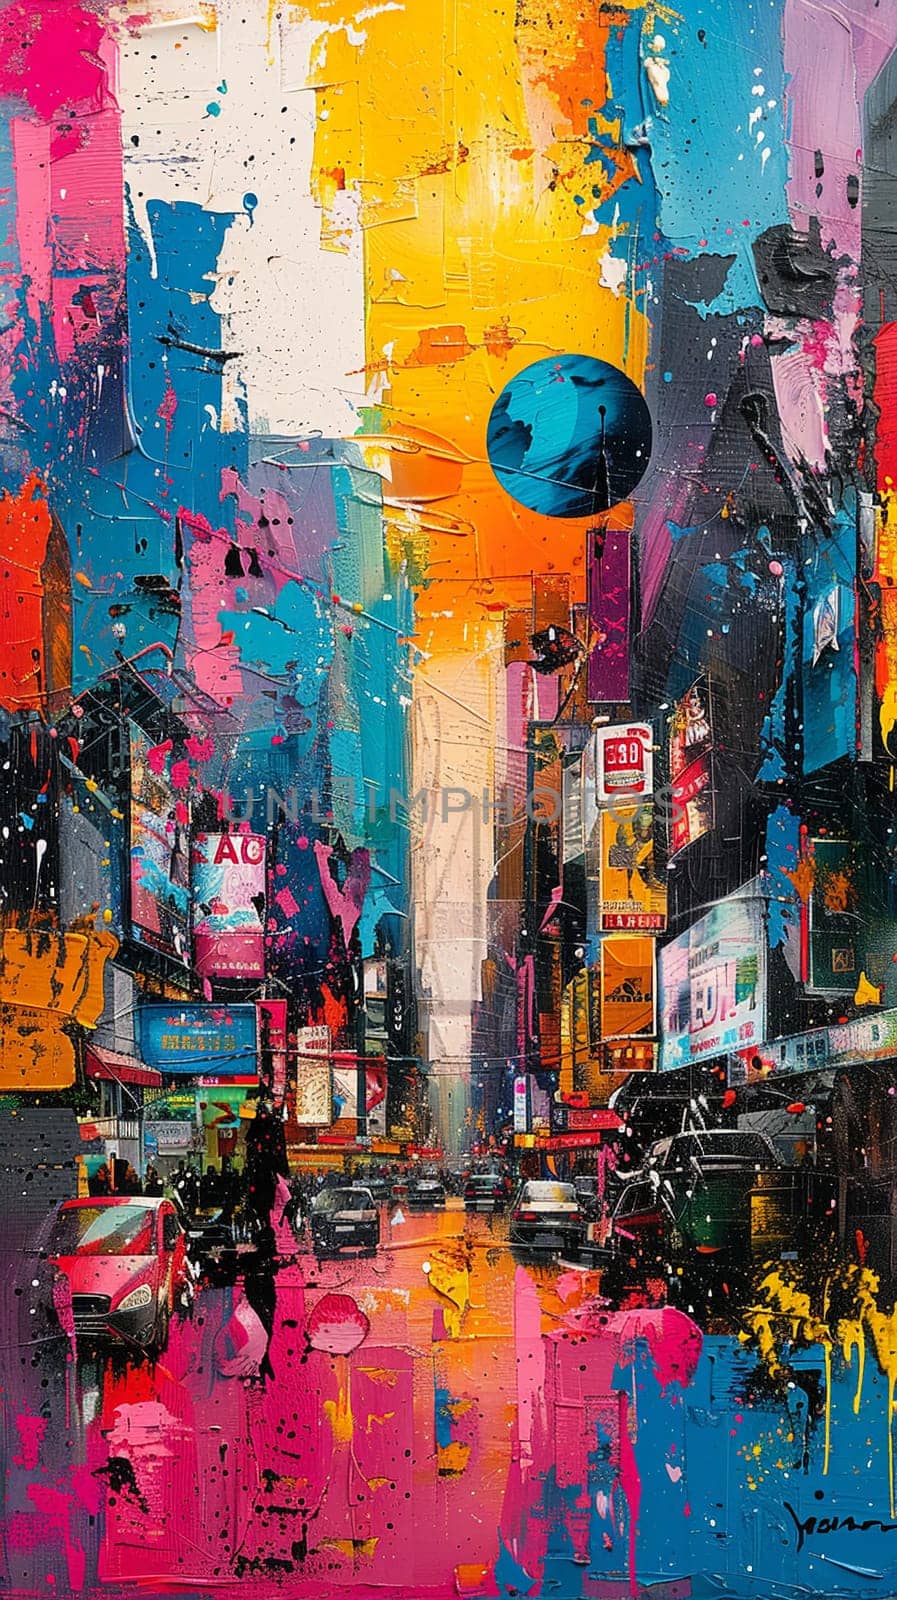 Bustling district street captured with energetic, abstract expressionist paint strokes.